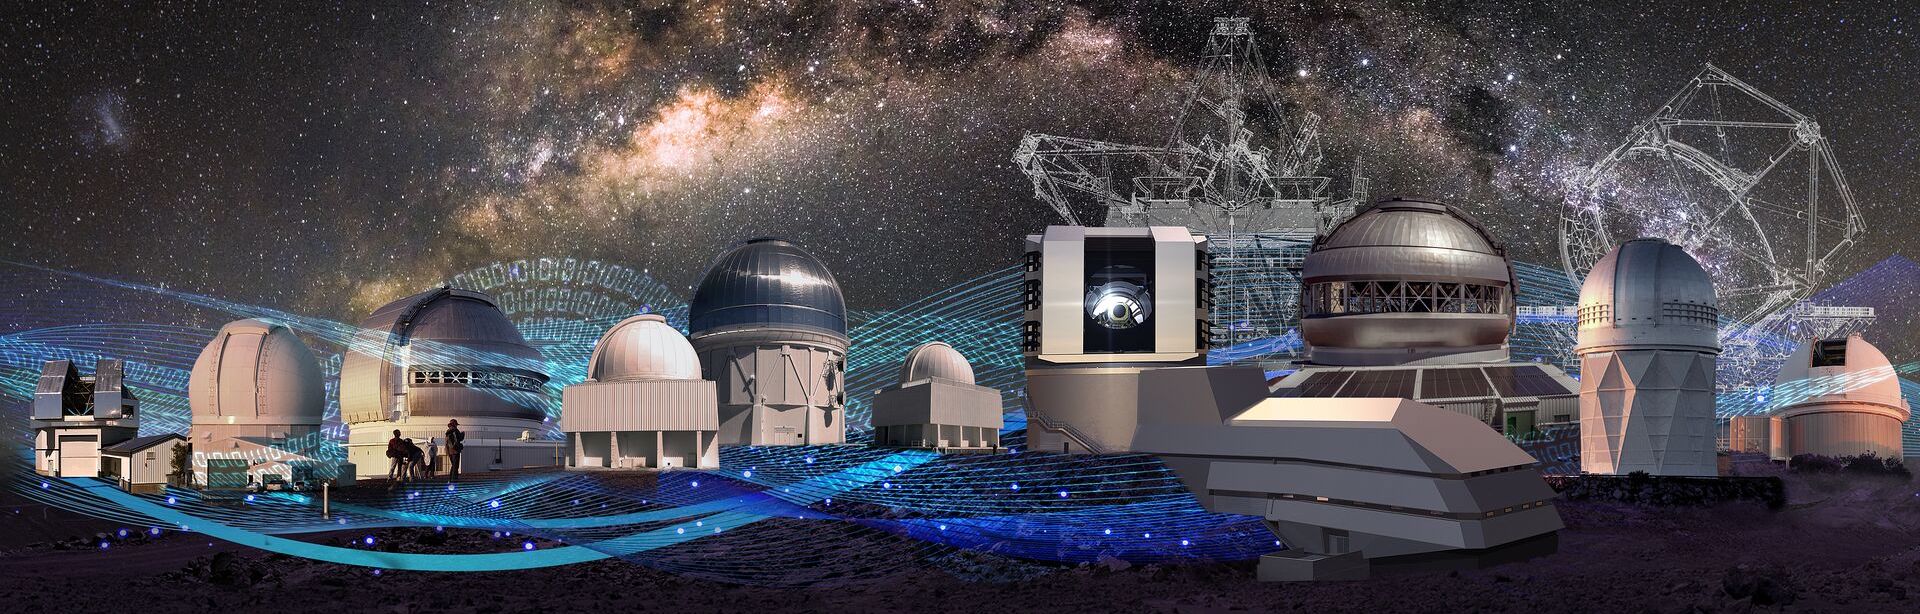 Artistic representation of NOIRLab domes and services with a picture of the Milky Way in the background.